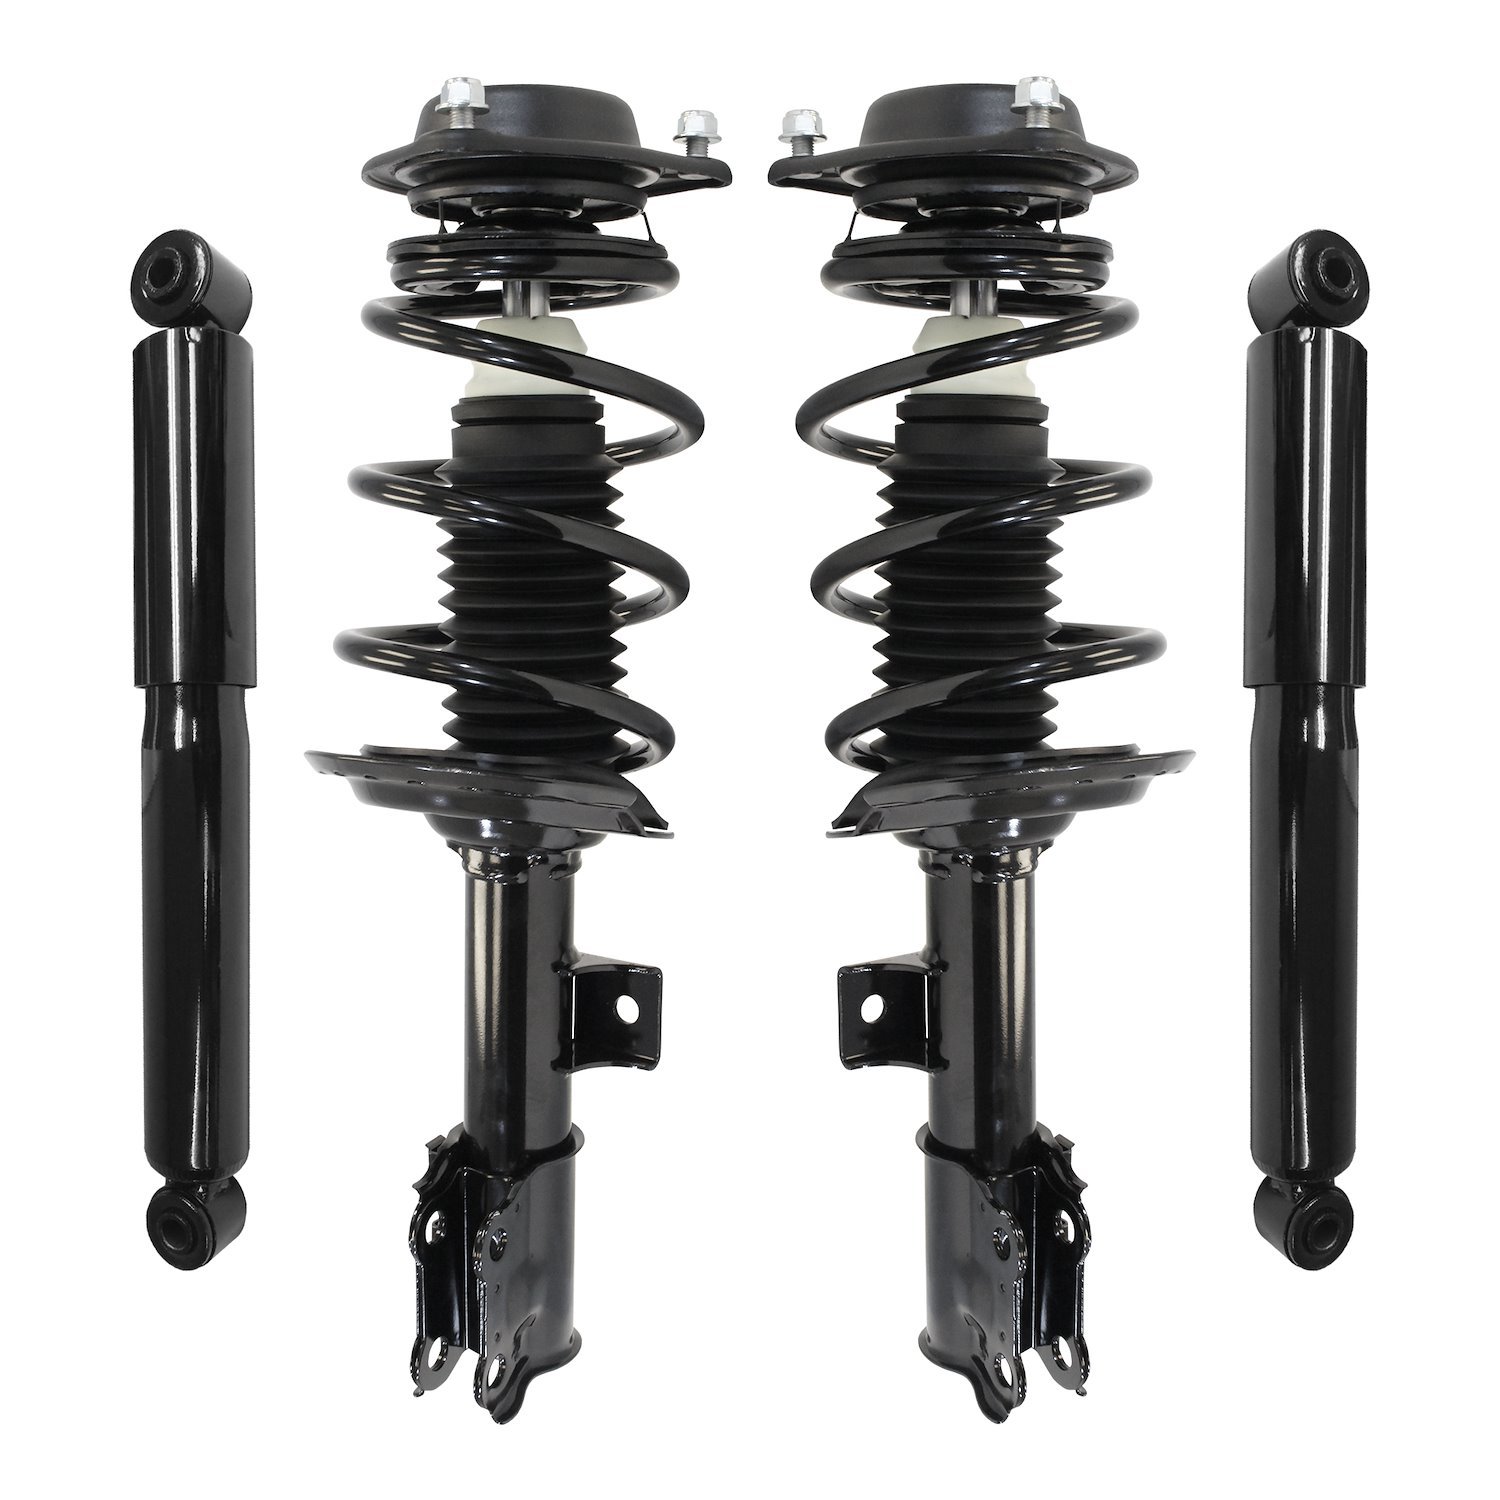 4-11137-259180-001 Front & Rear Suspension Strut & Coil Spring Assembly Fits Select Hyundai Elantra